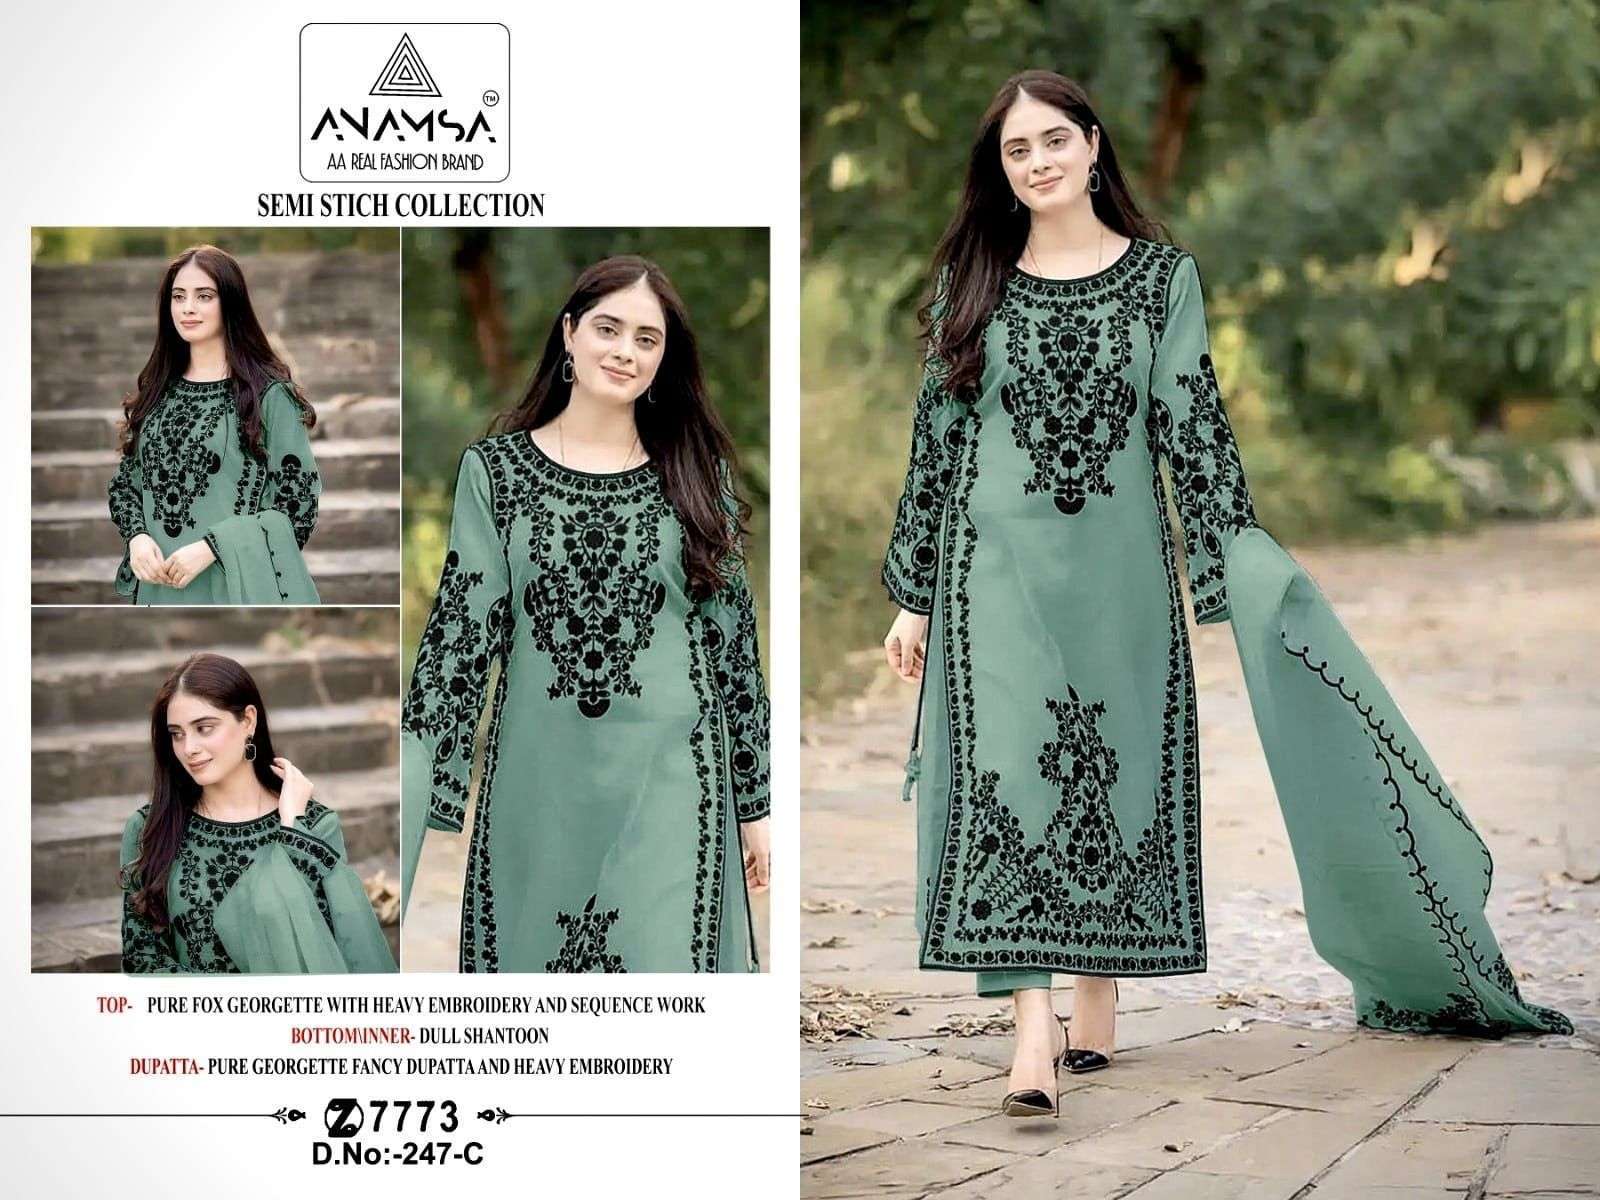 Anamsa 247 Colors  Georgette With Heavy Embroidery With Sequ...